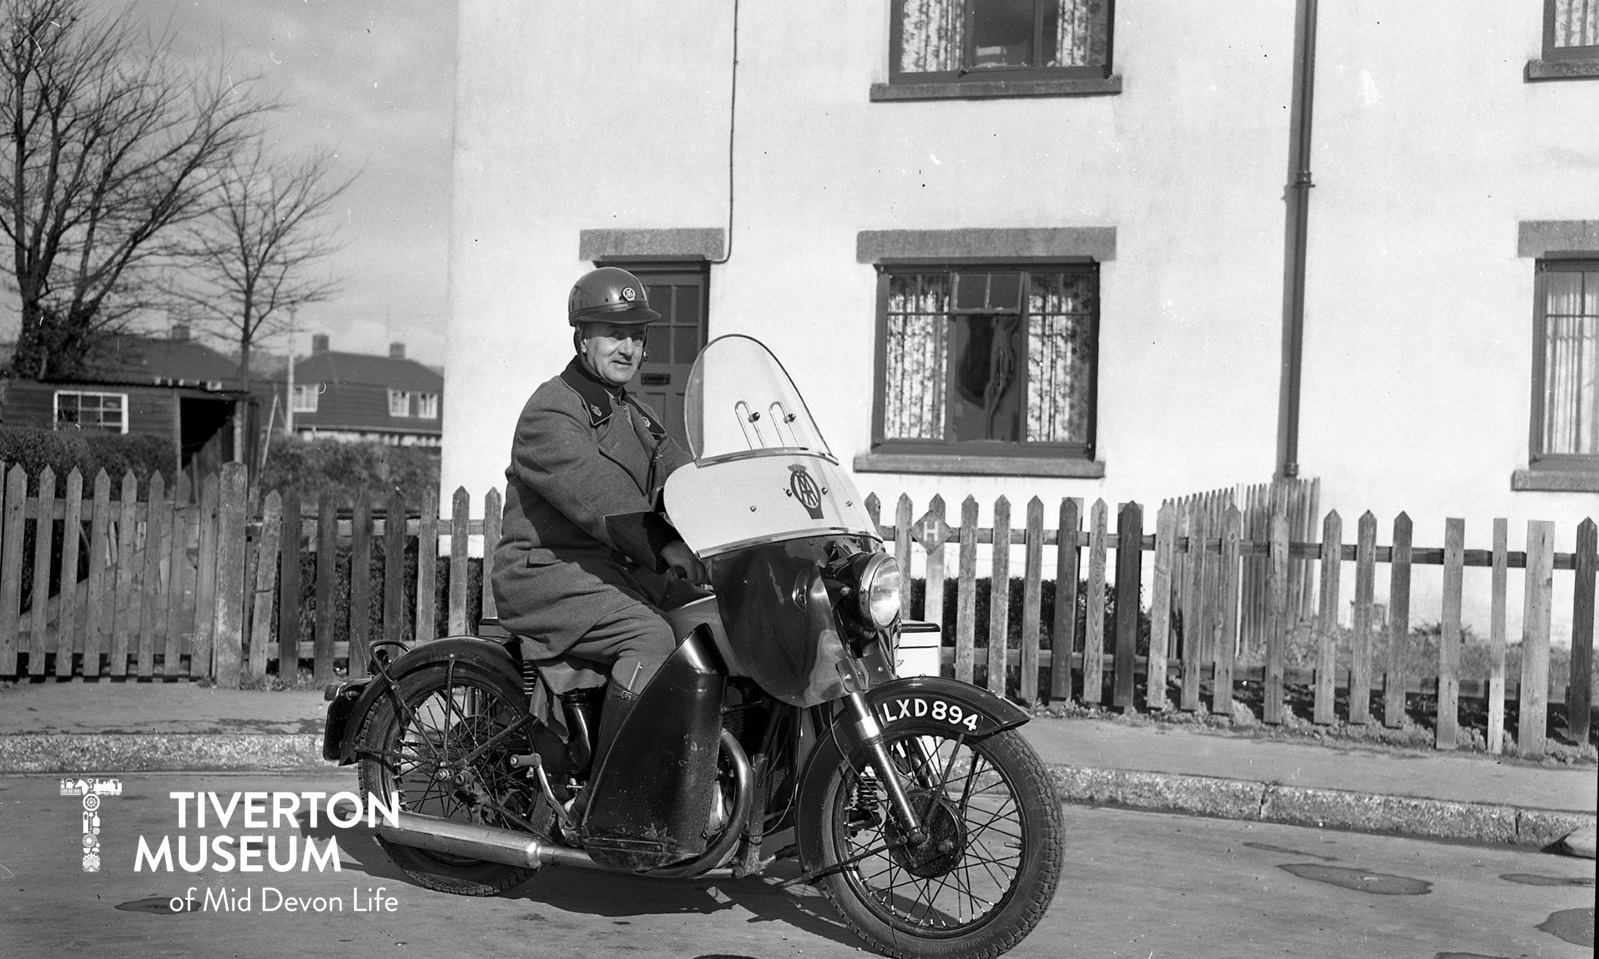 A black and white photo of a man sitting on a motorbike in front of a house. The bike has an AA logo, as does the man's helmet. He is wearing a big heavy looking coat and gloves.